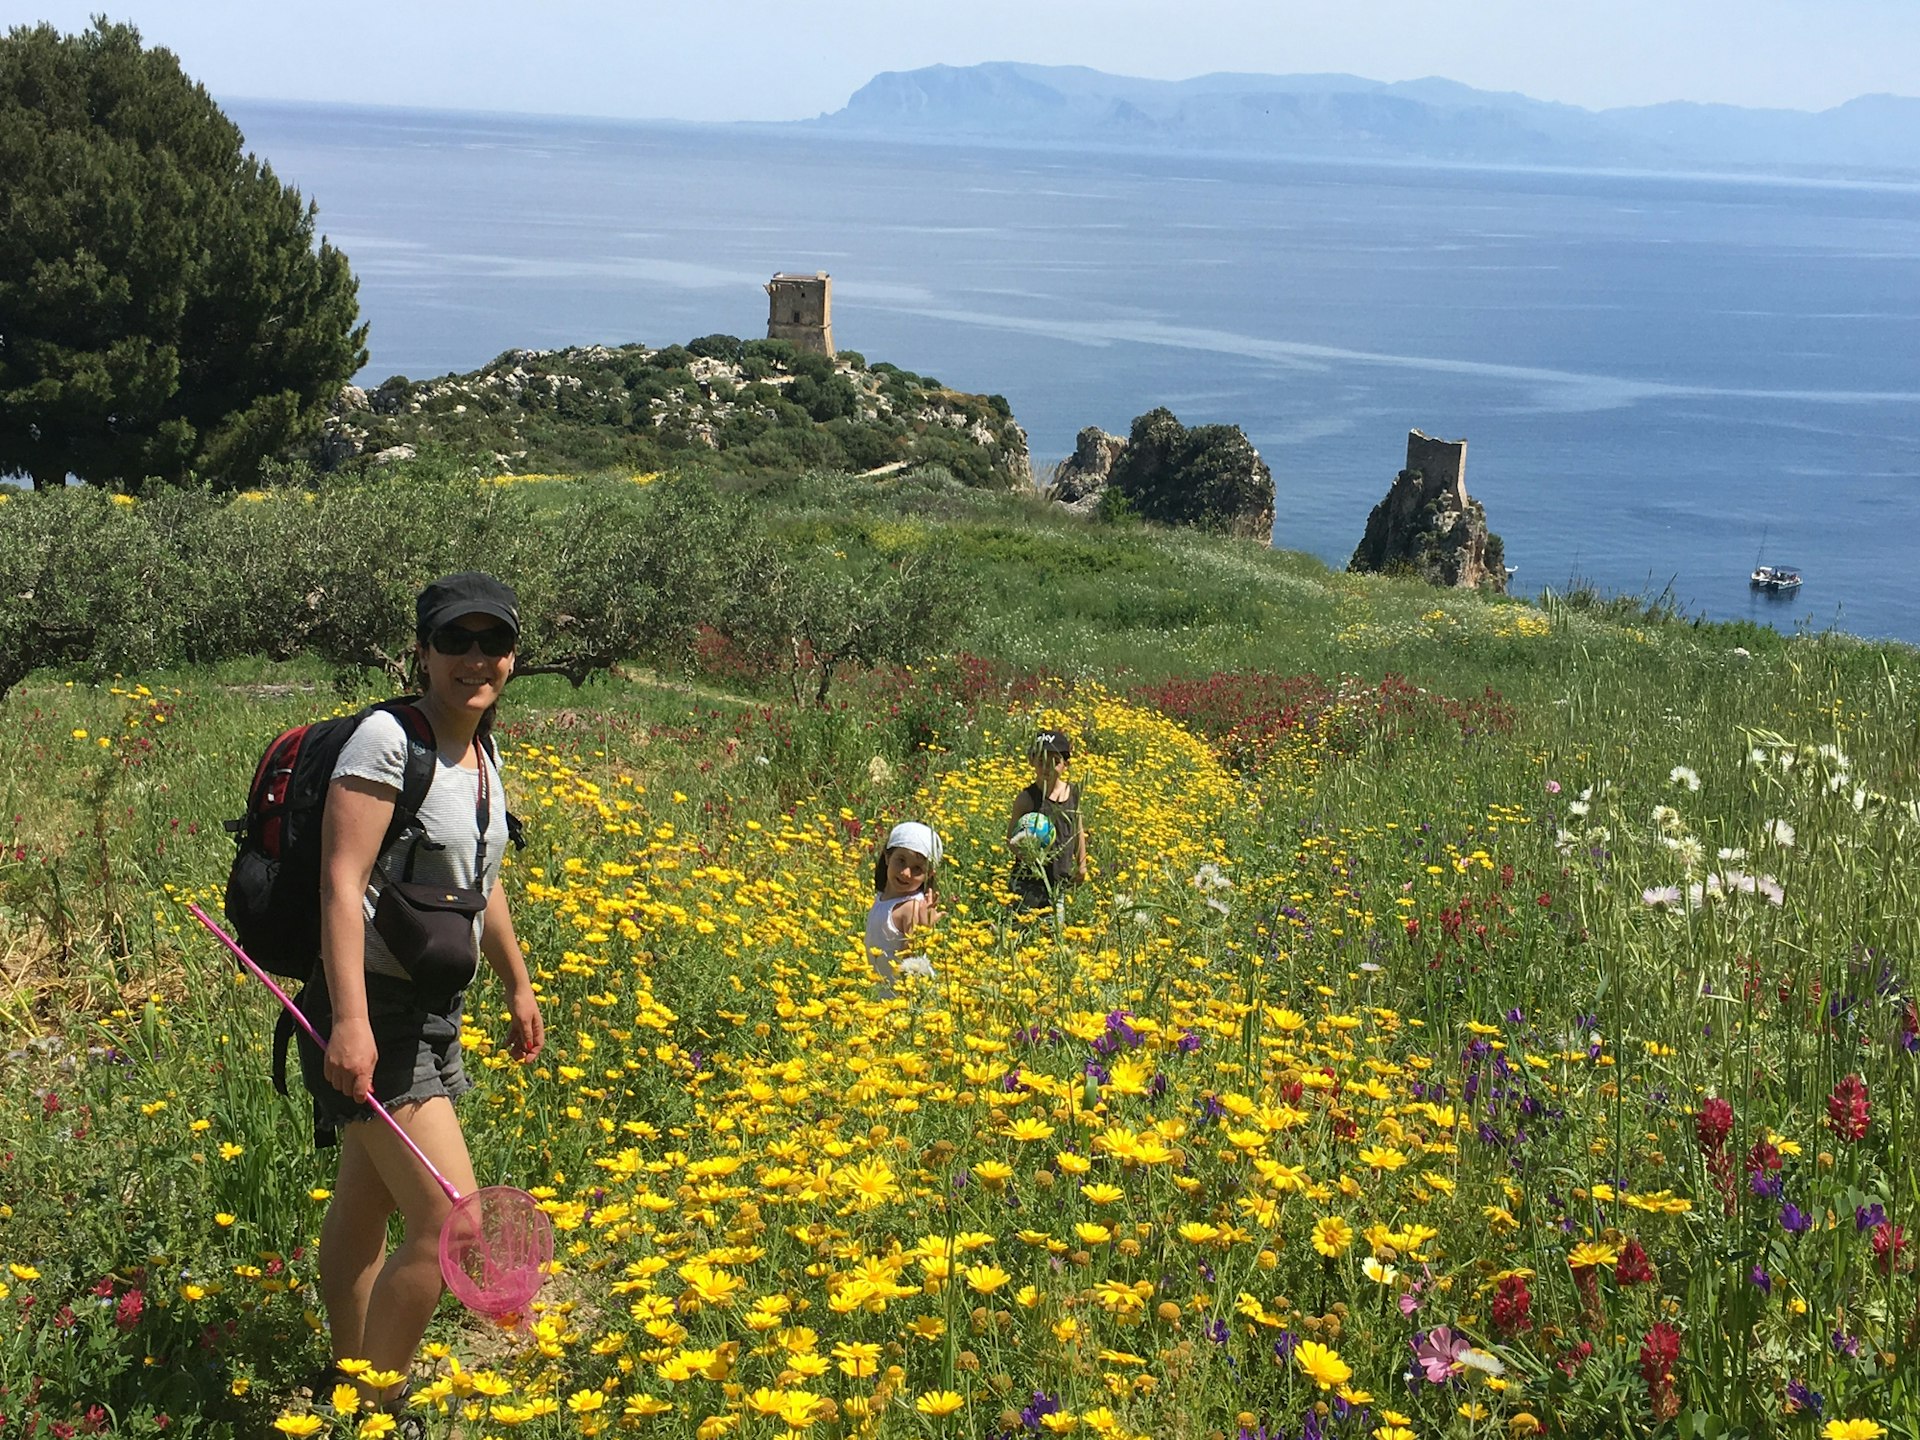 A mother and children walk among the wildflowers in the province of Trapani © Getty Images